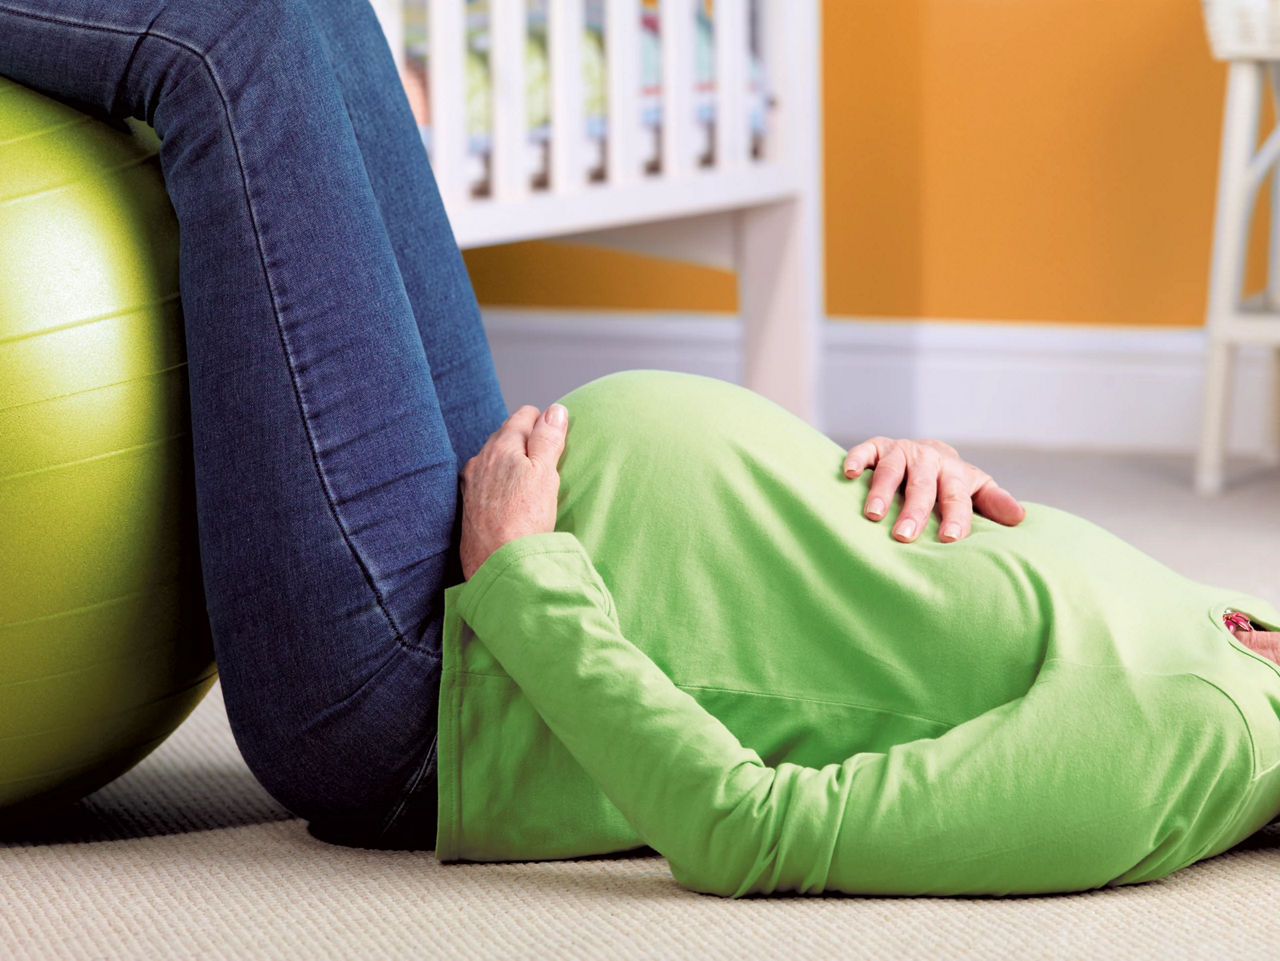 Pregnant woman laying on the floor